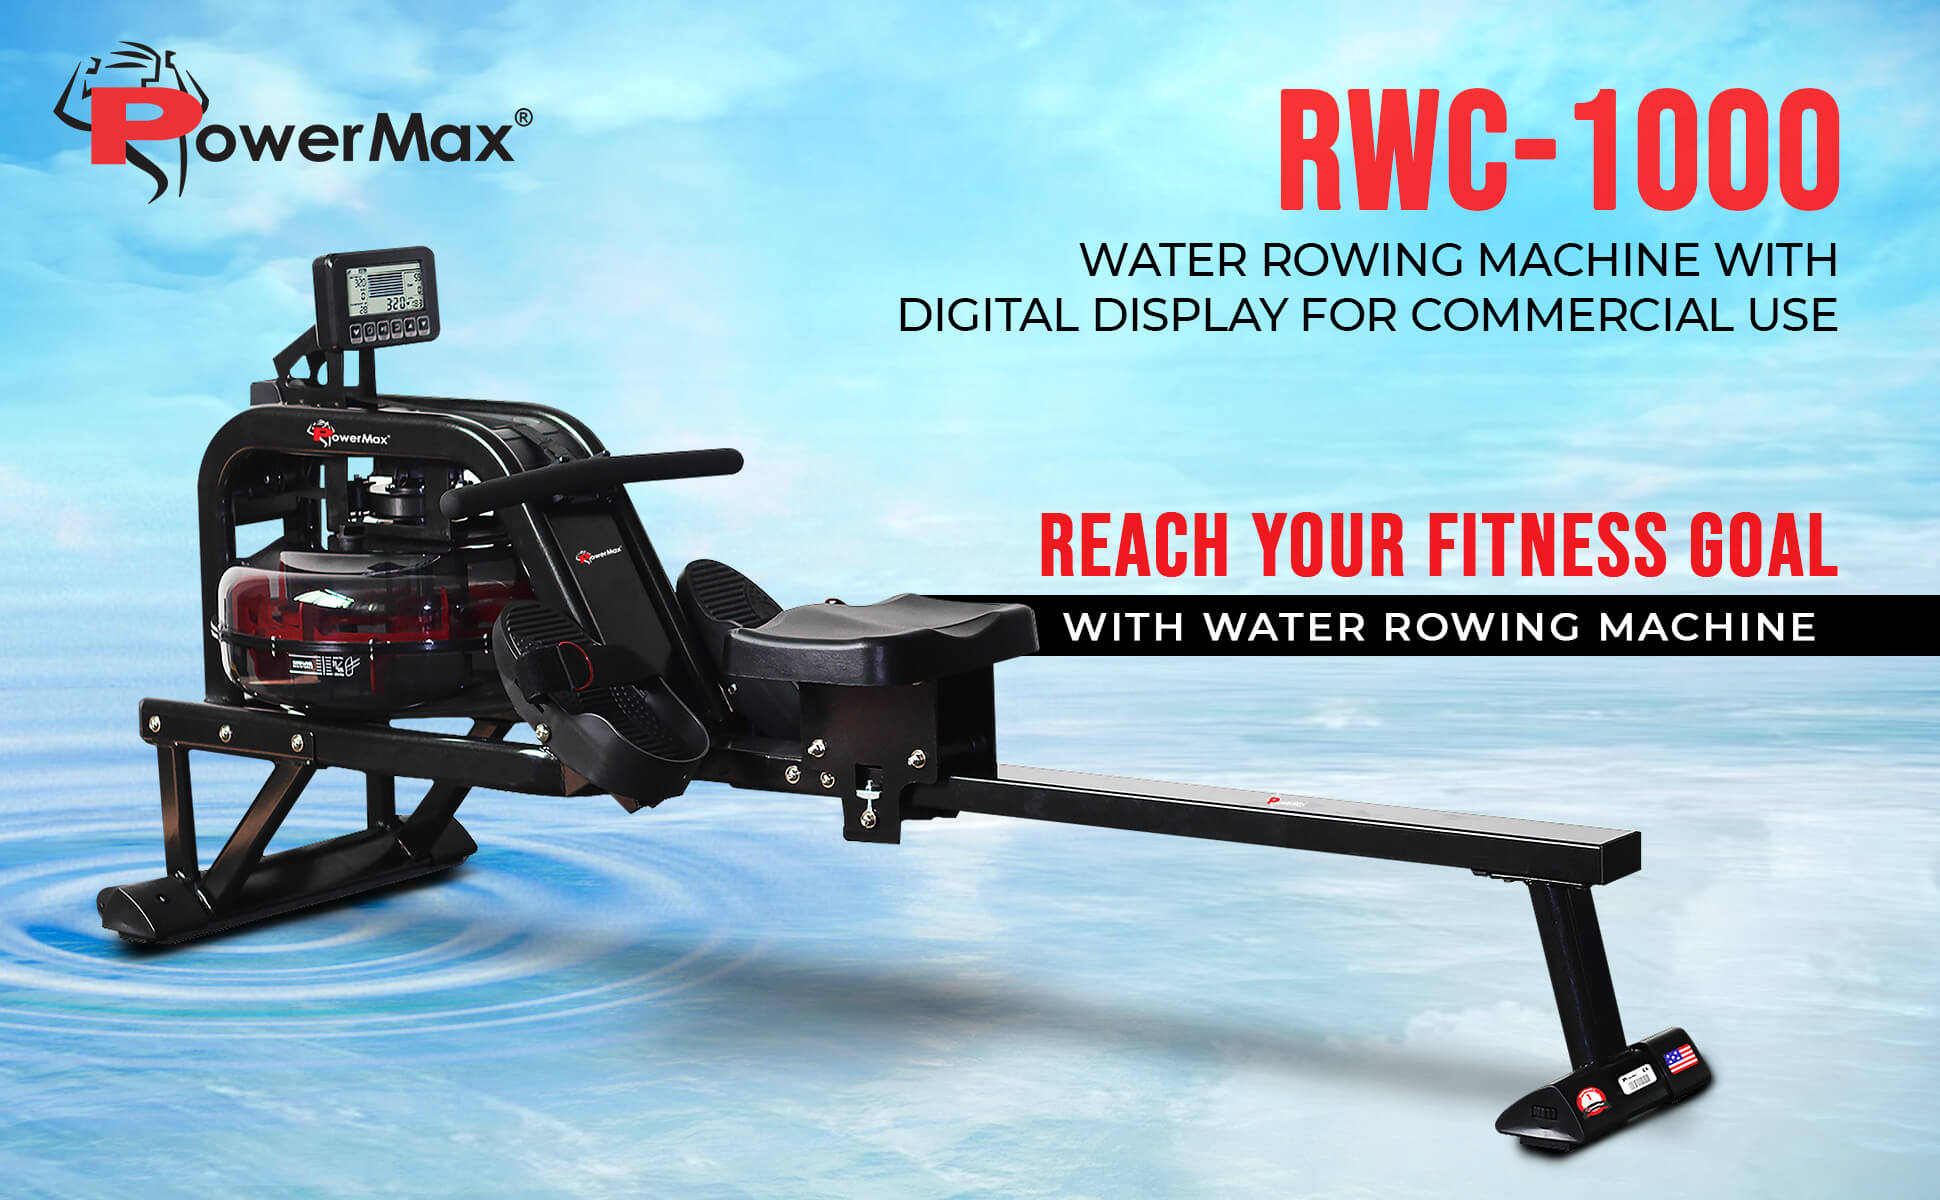 PowerMax Fitness RWC-1000 Water Rowing Machine with Digital Display for Semi-Commercial use